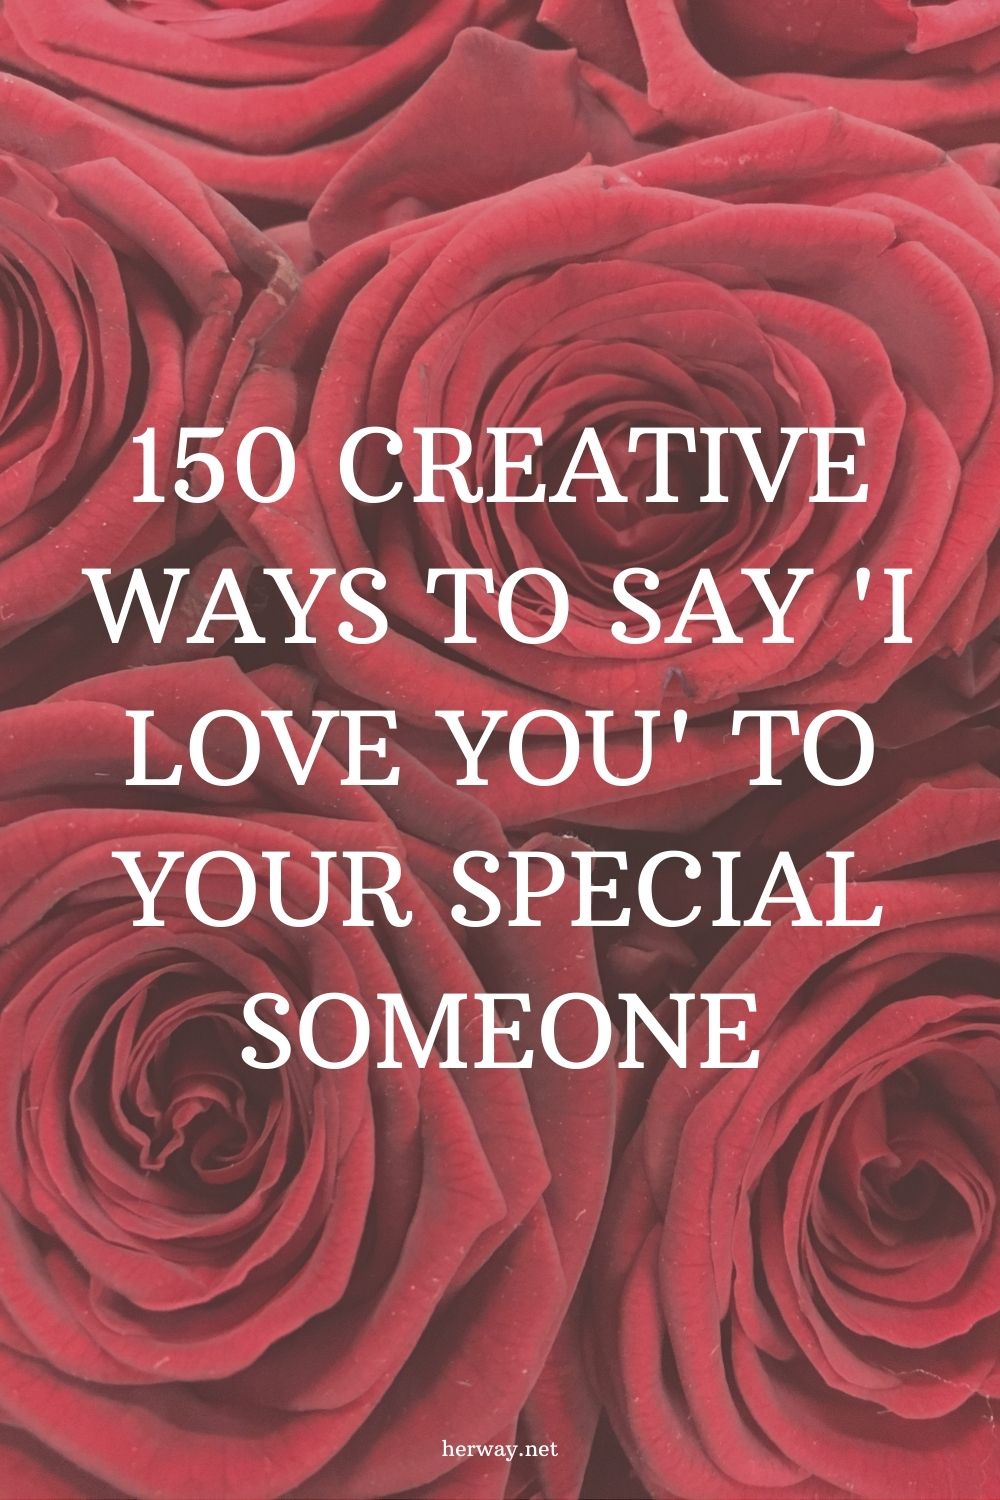 150 Creative Ways To Say 'I Love You' To Your Special Someone 